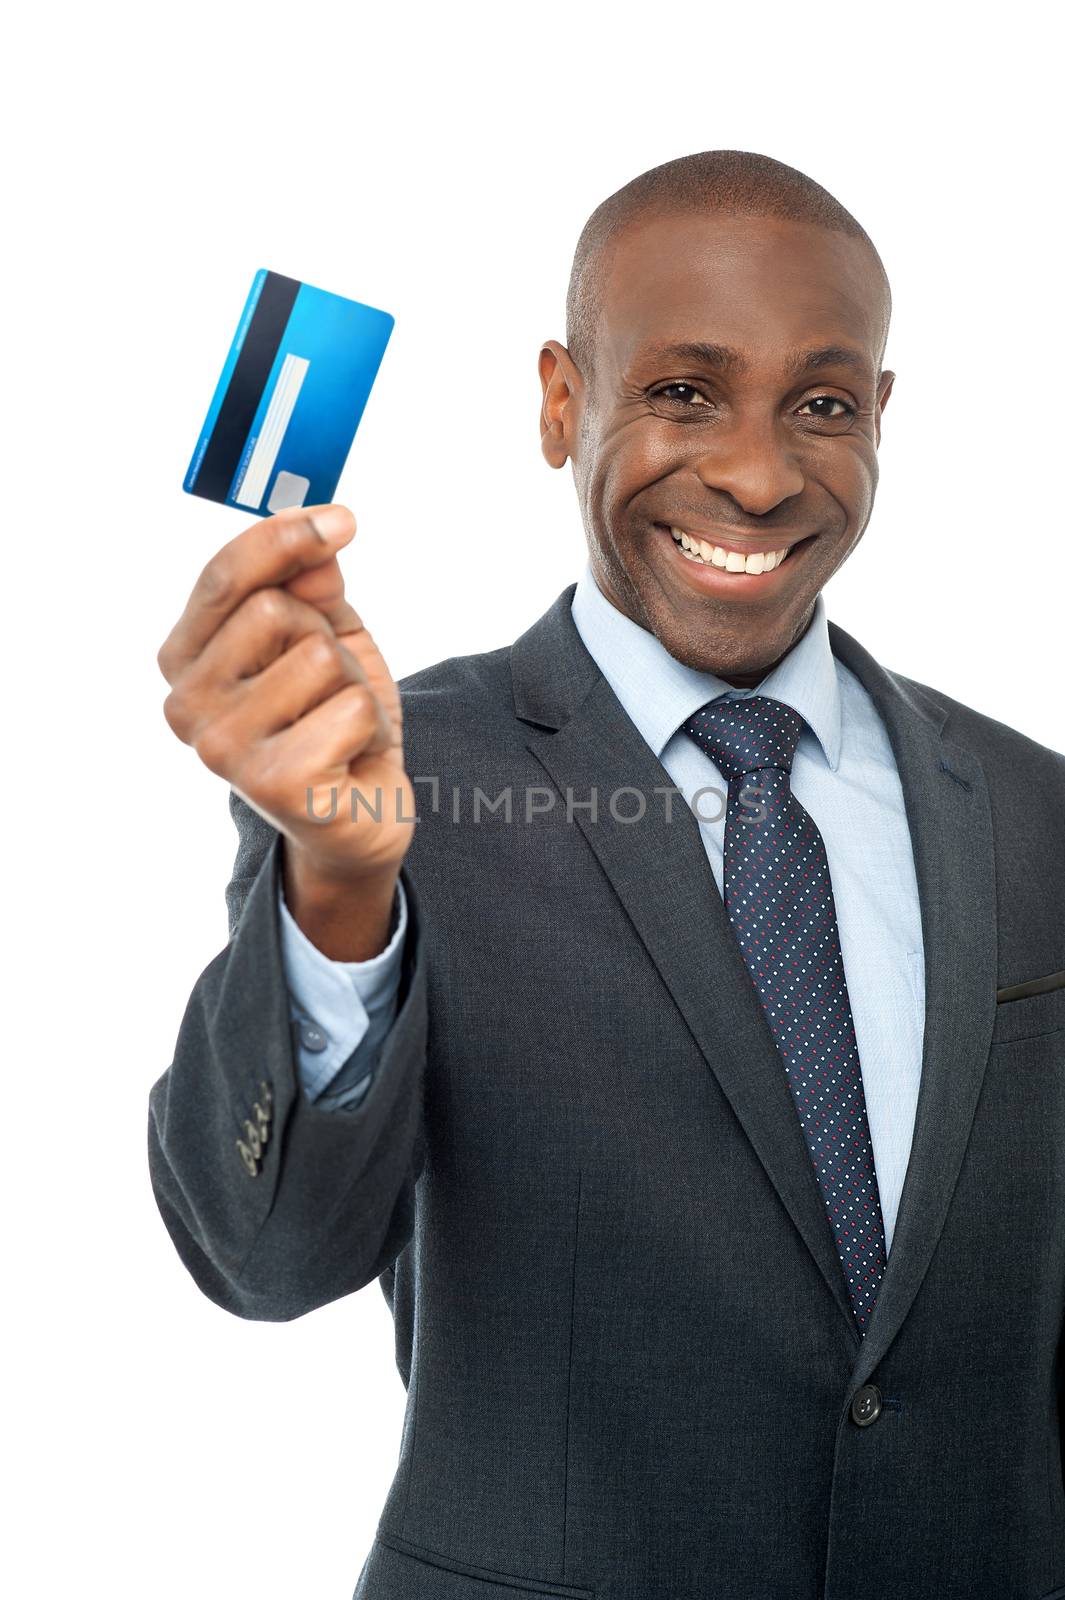 Smiling businessman showing his credit card